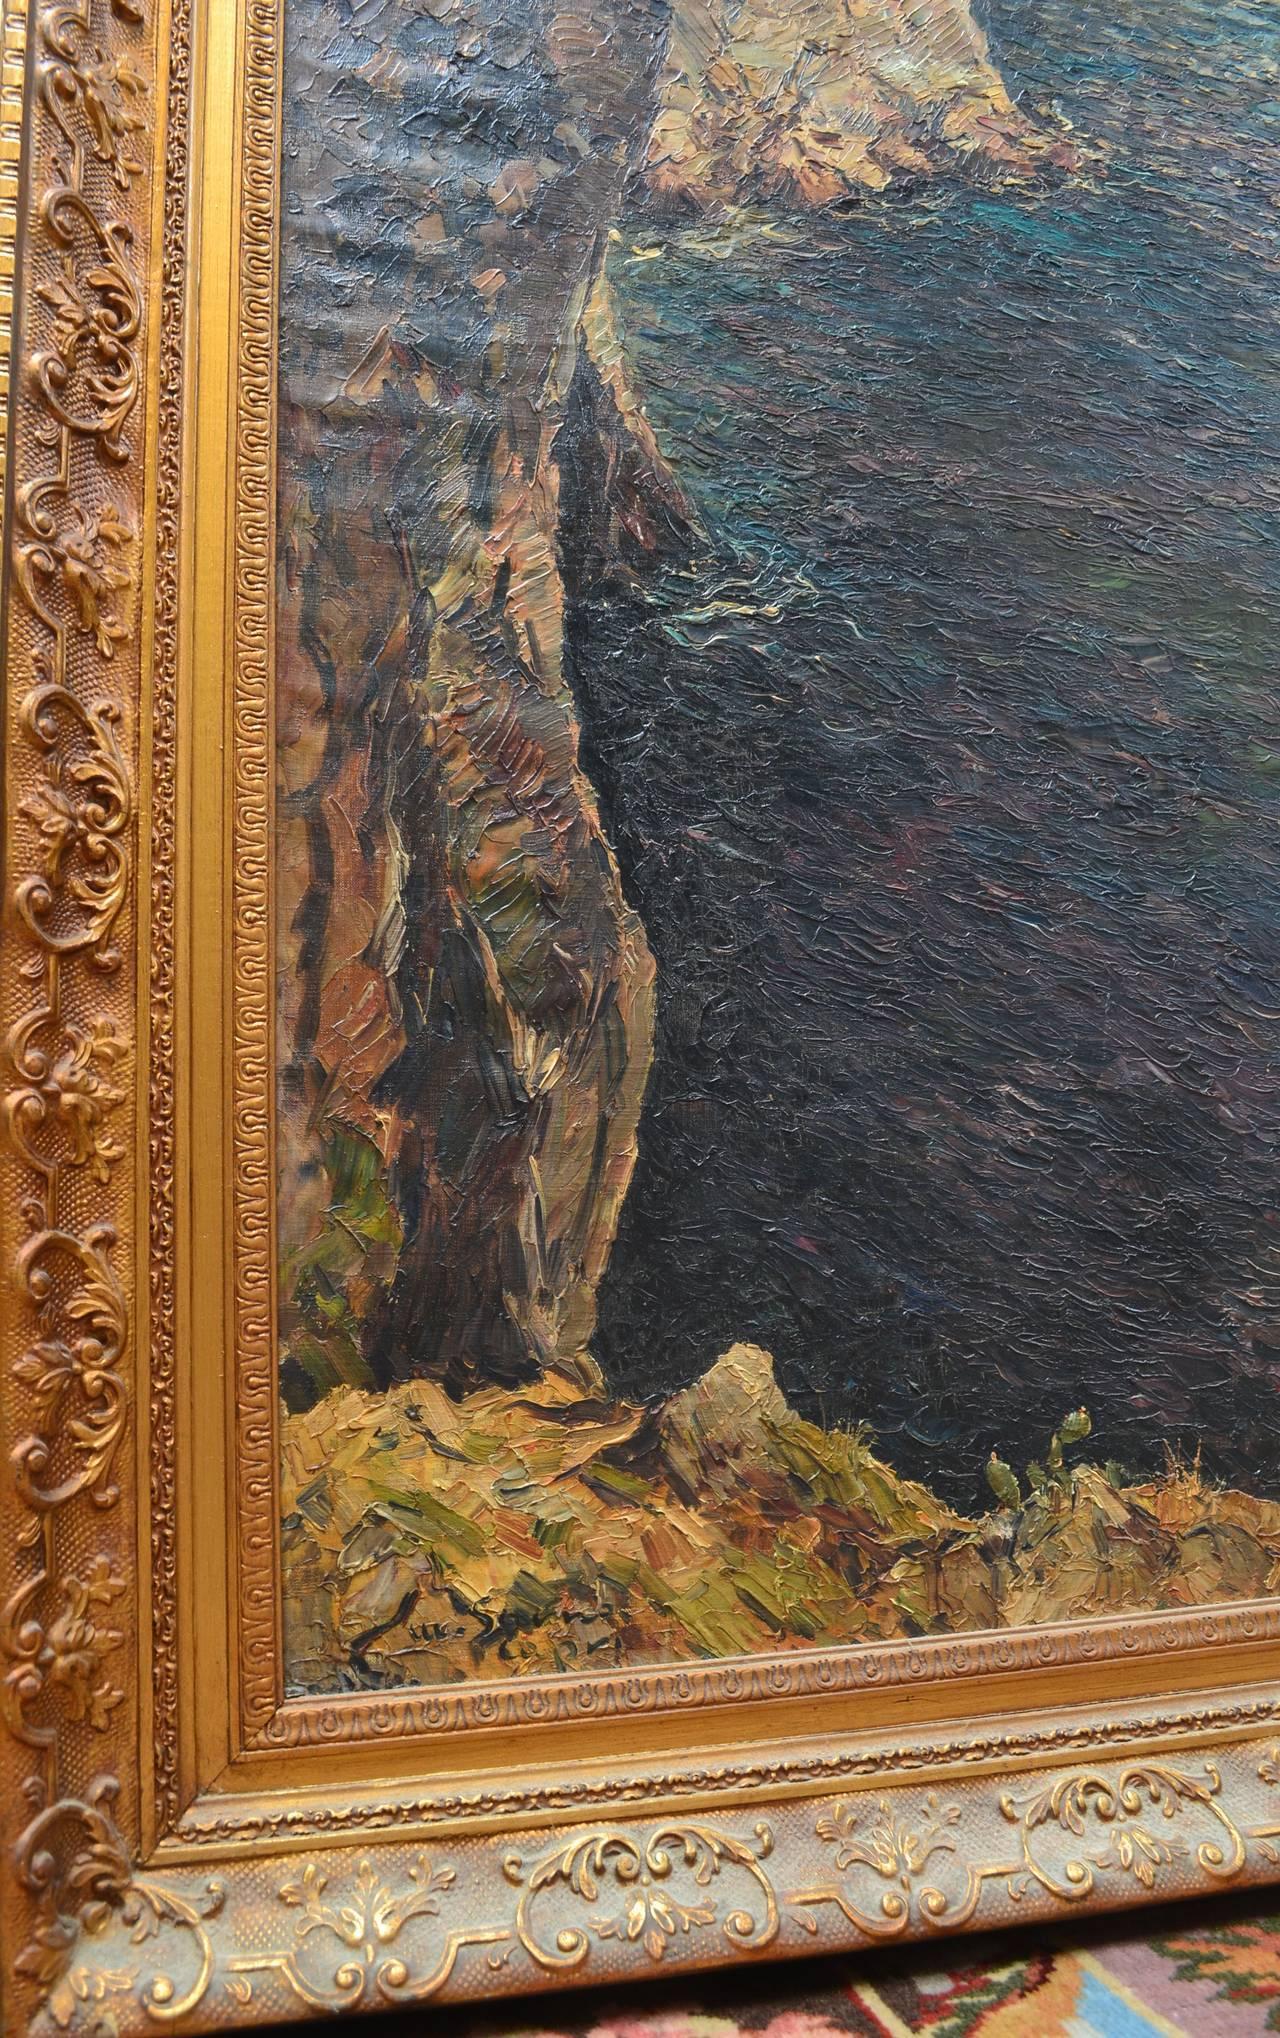 An oil painting of the Isle of Capri, showing rocky cliffs and a colorful sea painted in the impressionist style. The painting is titled 'Capri' and is signed Matteo Sarno (Italian, 1895-1957), likely painted circa 1930. Gilt frame is suspected to